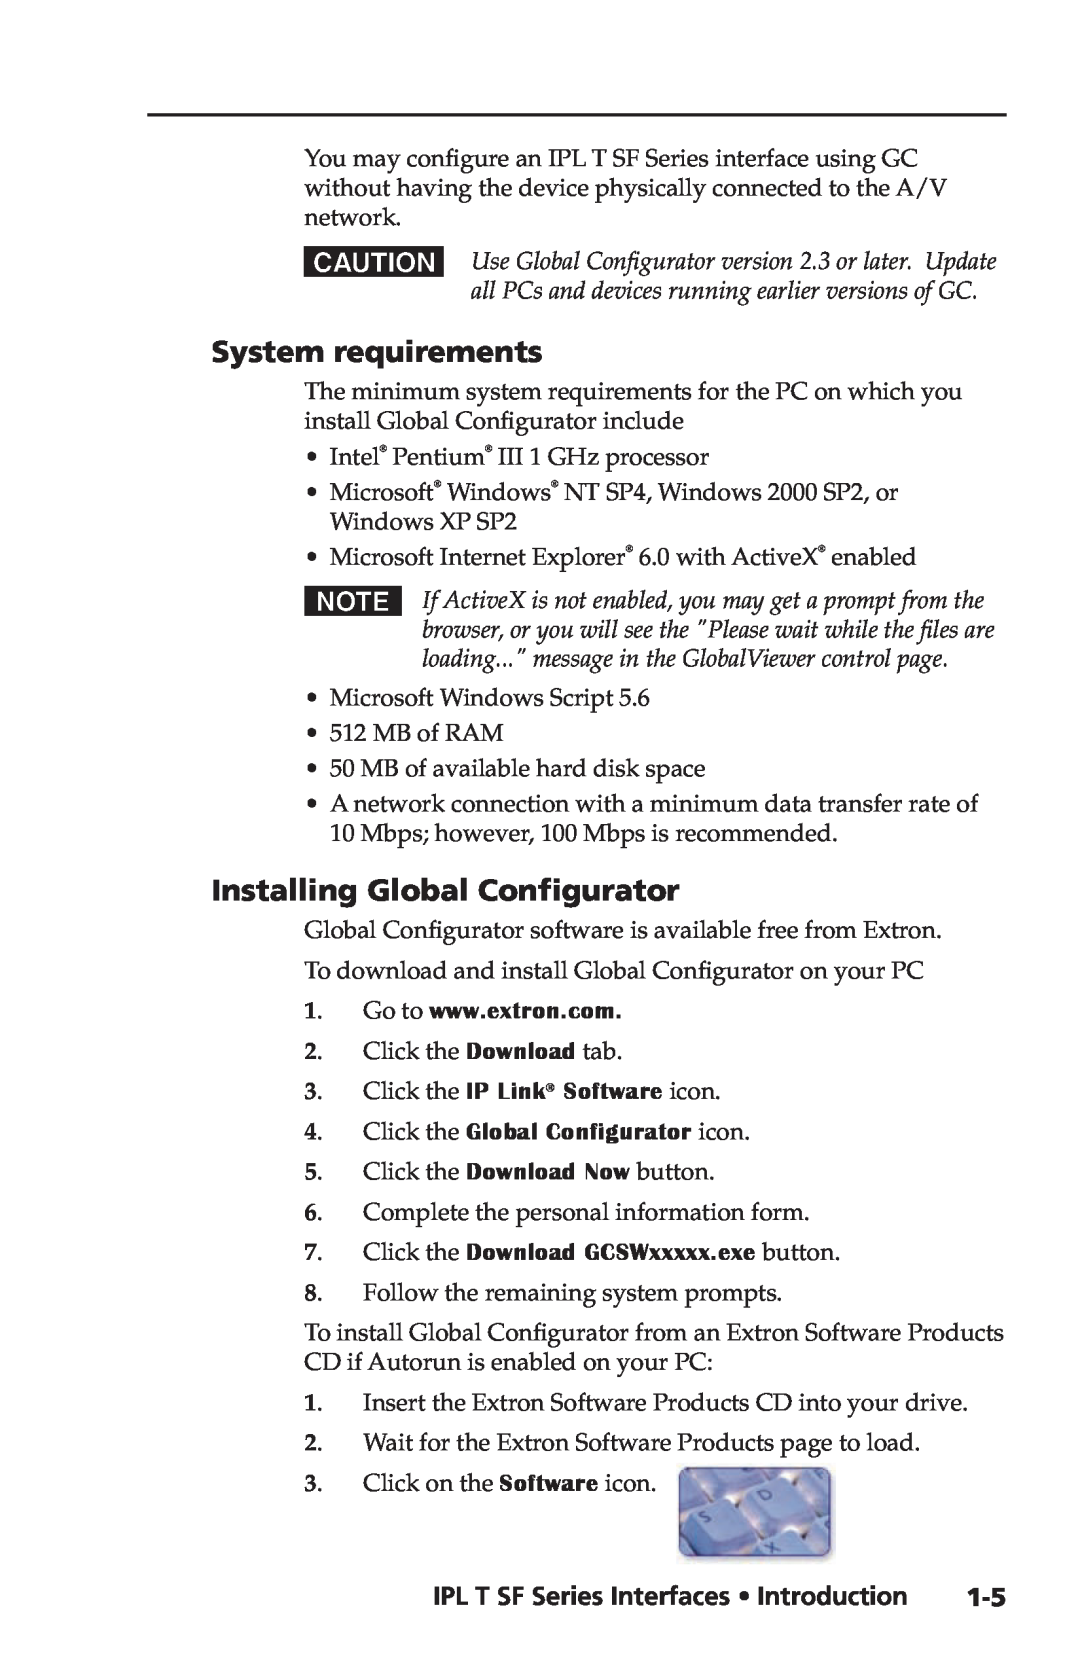 Extron electronic IPL T SF Series System requirements, Installing Global Configurator, Click the Global Configurator icon 